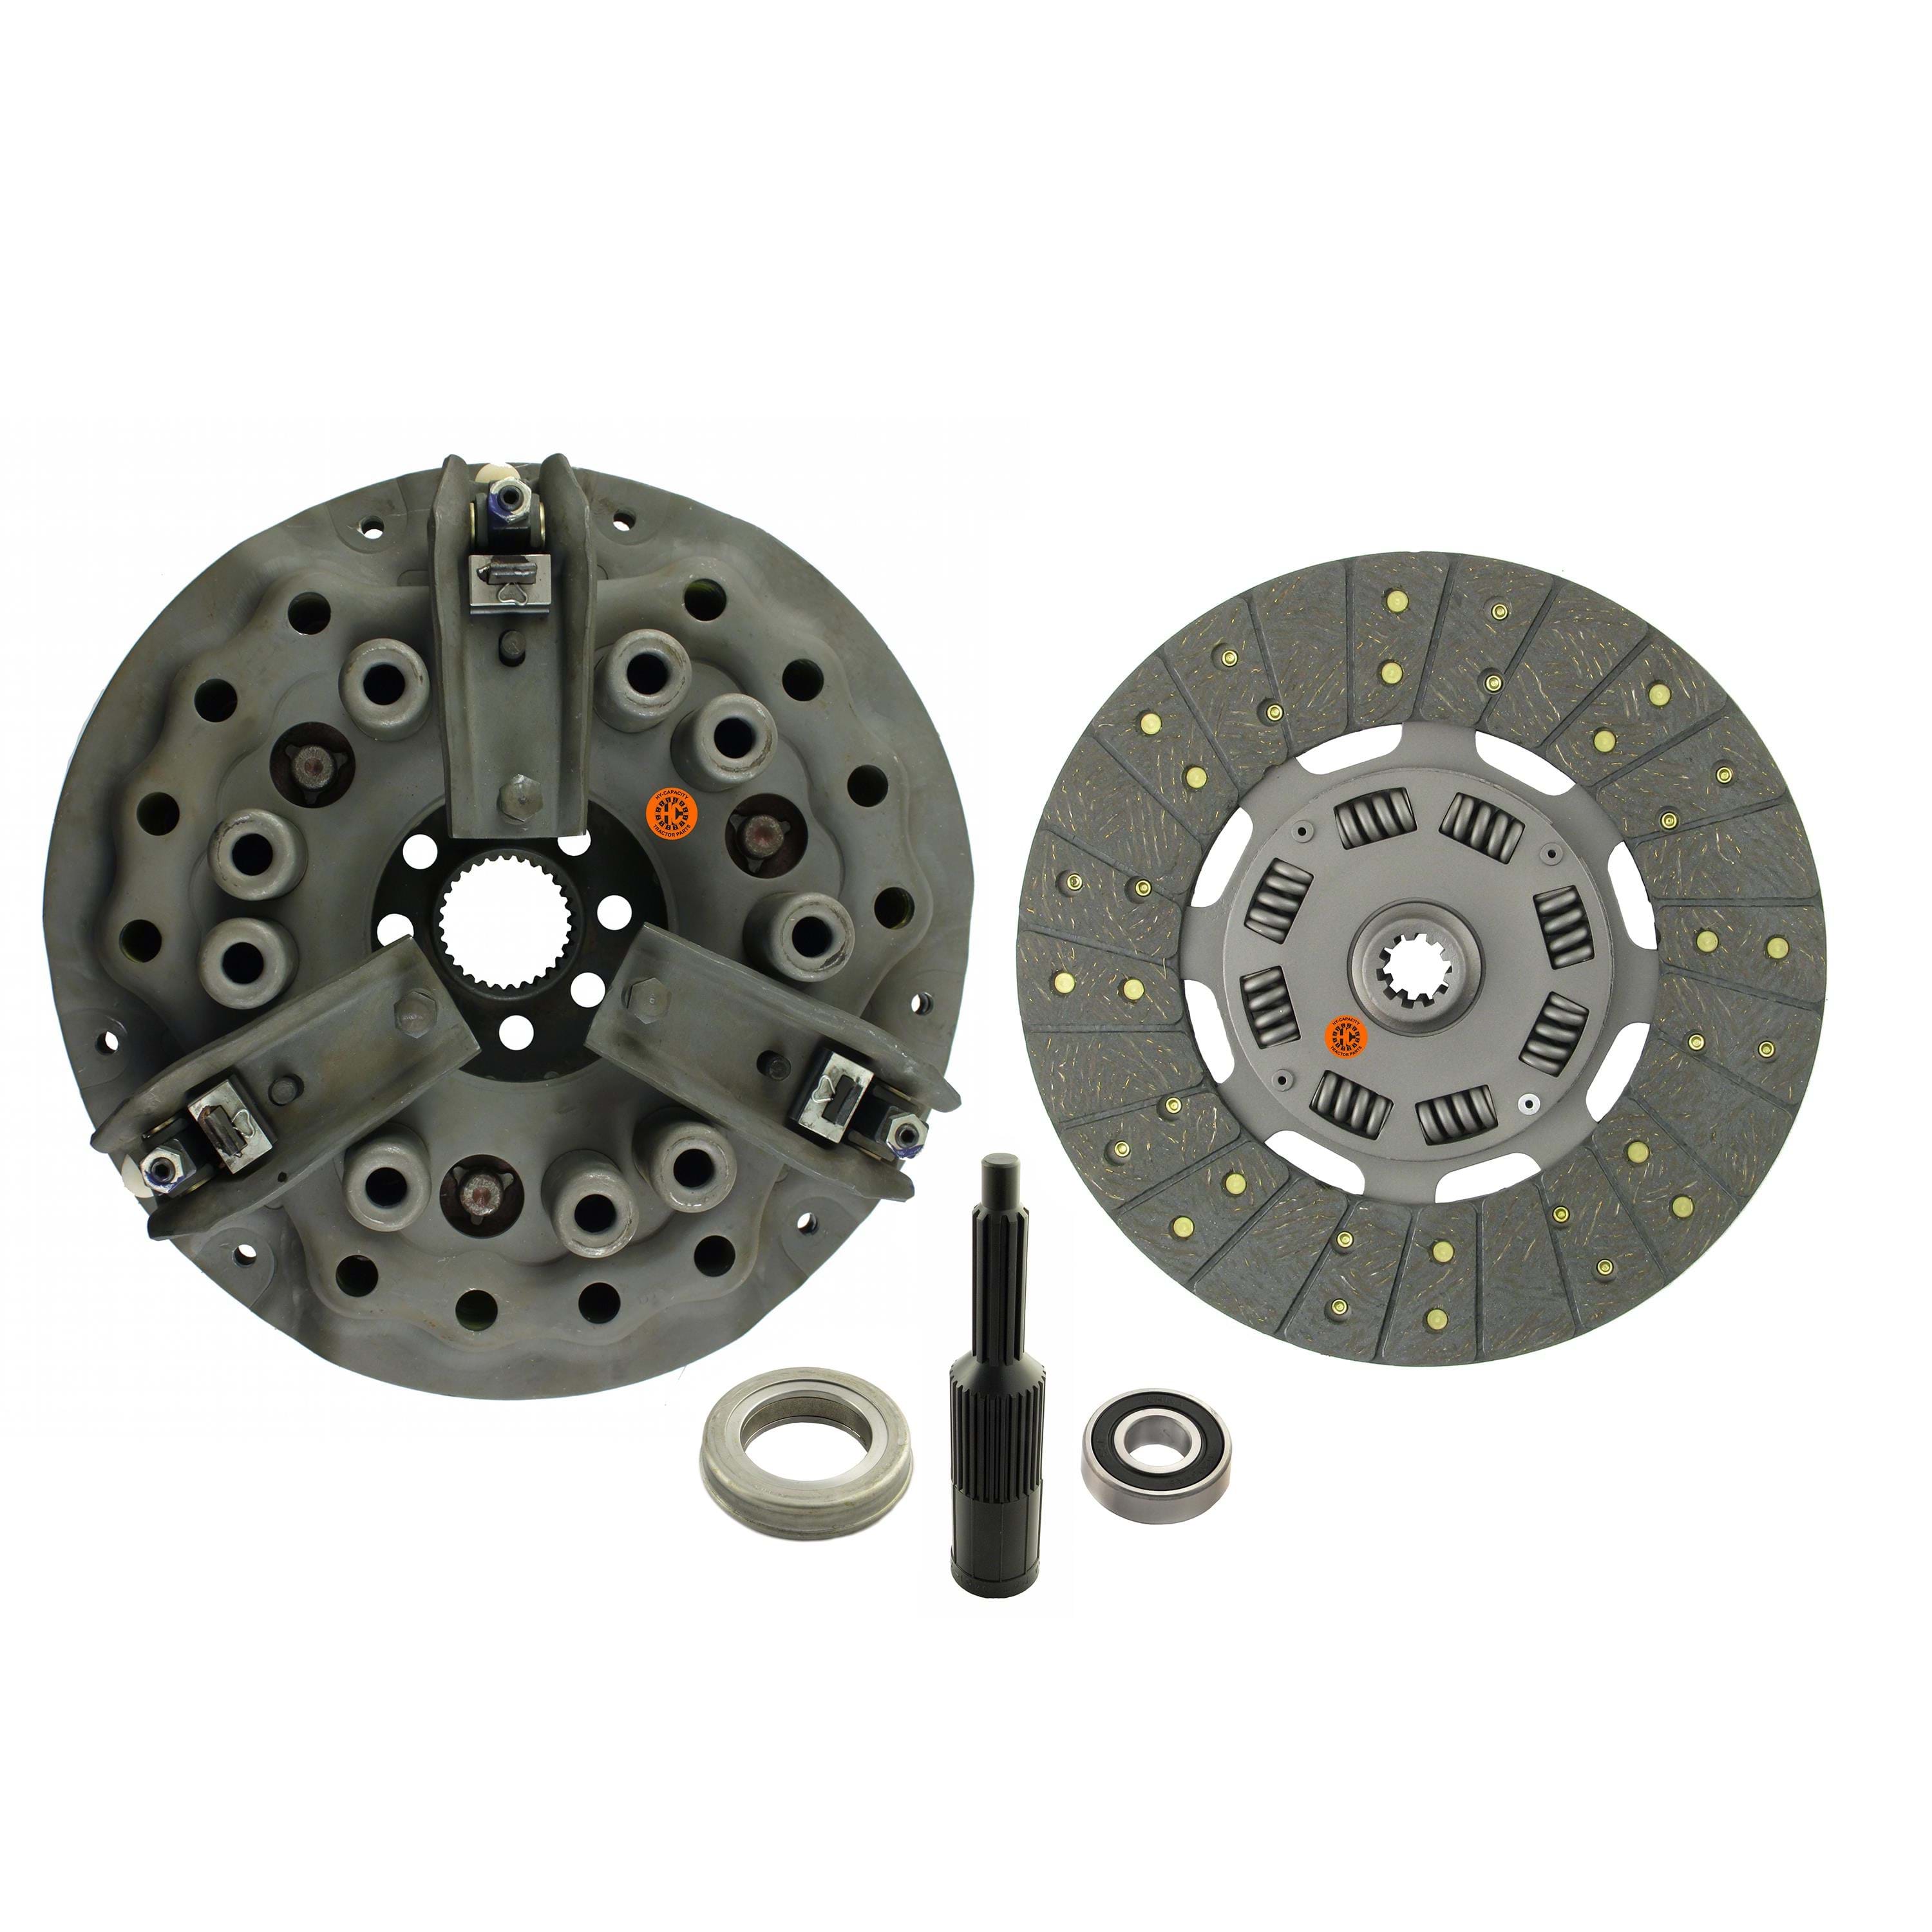 11" Dual Stage Clutch Kit, w/ 10 Spline Transmission Disc, Bearings & Alignment Tool - New